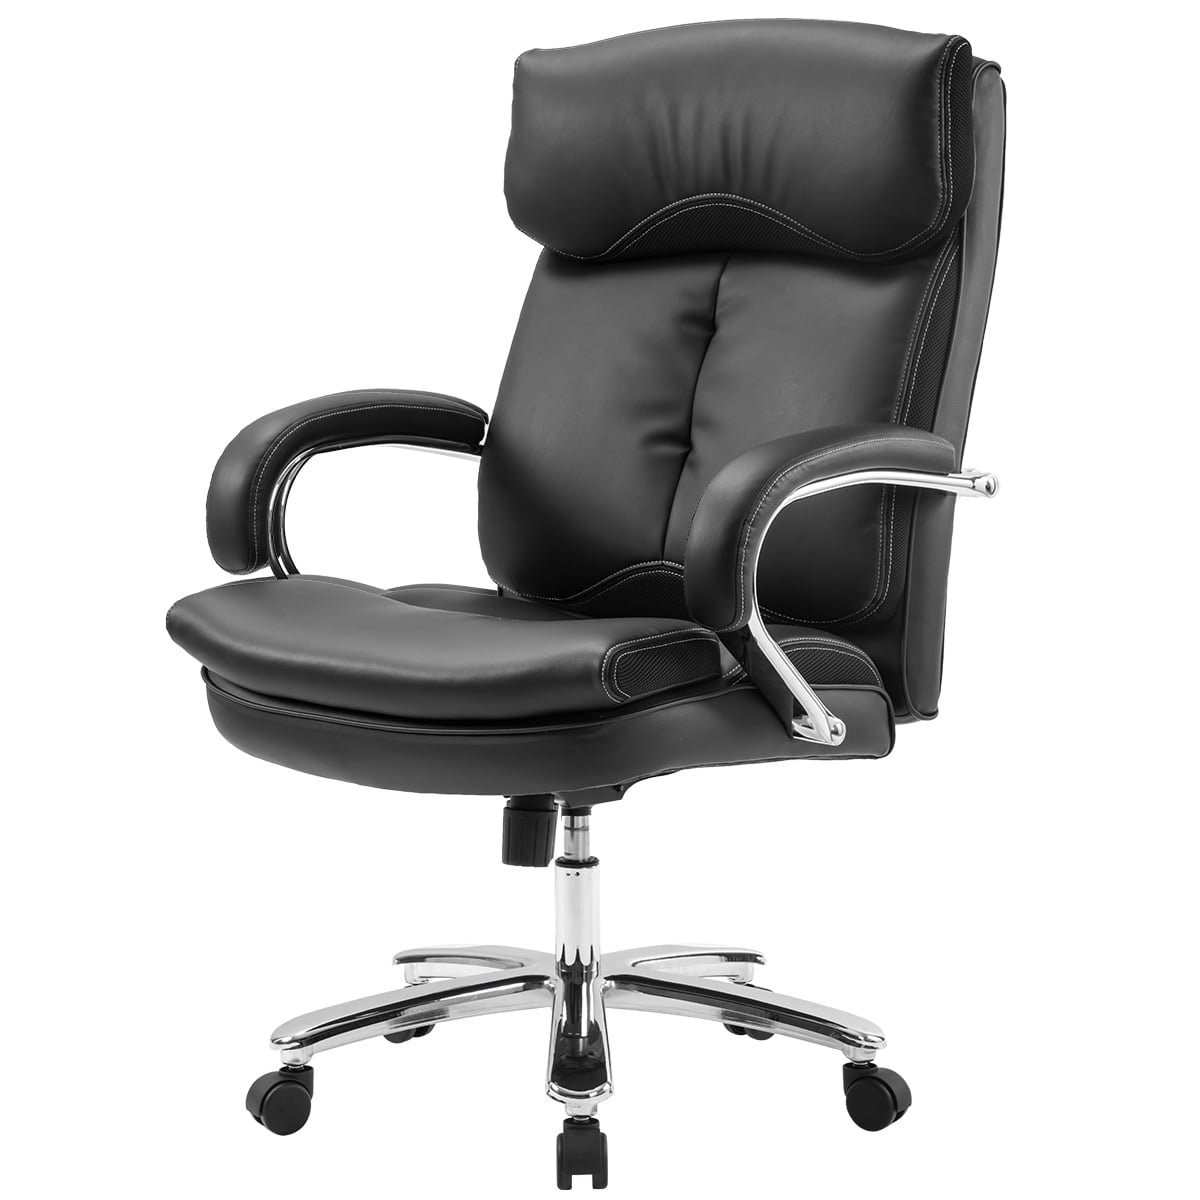 CLEARANCE! 26''x26''x47.6'' Big and Tall Office Chair, Ergonomic PU Leather High Back Cheap